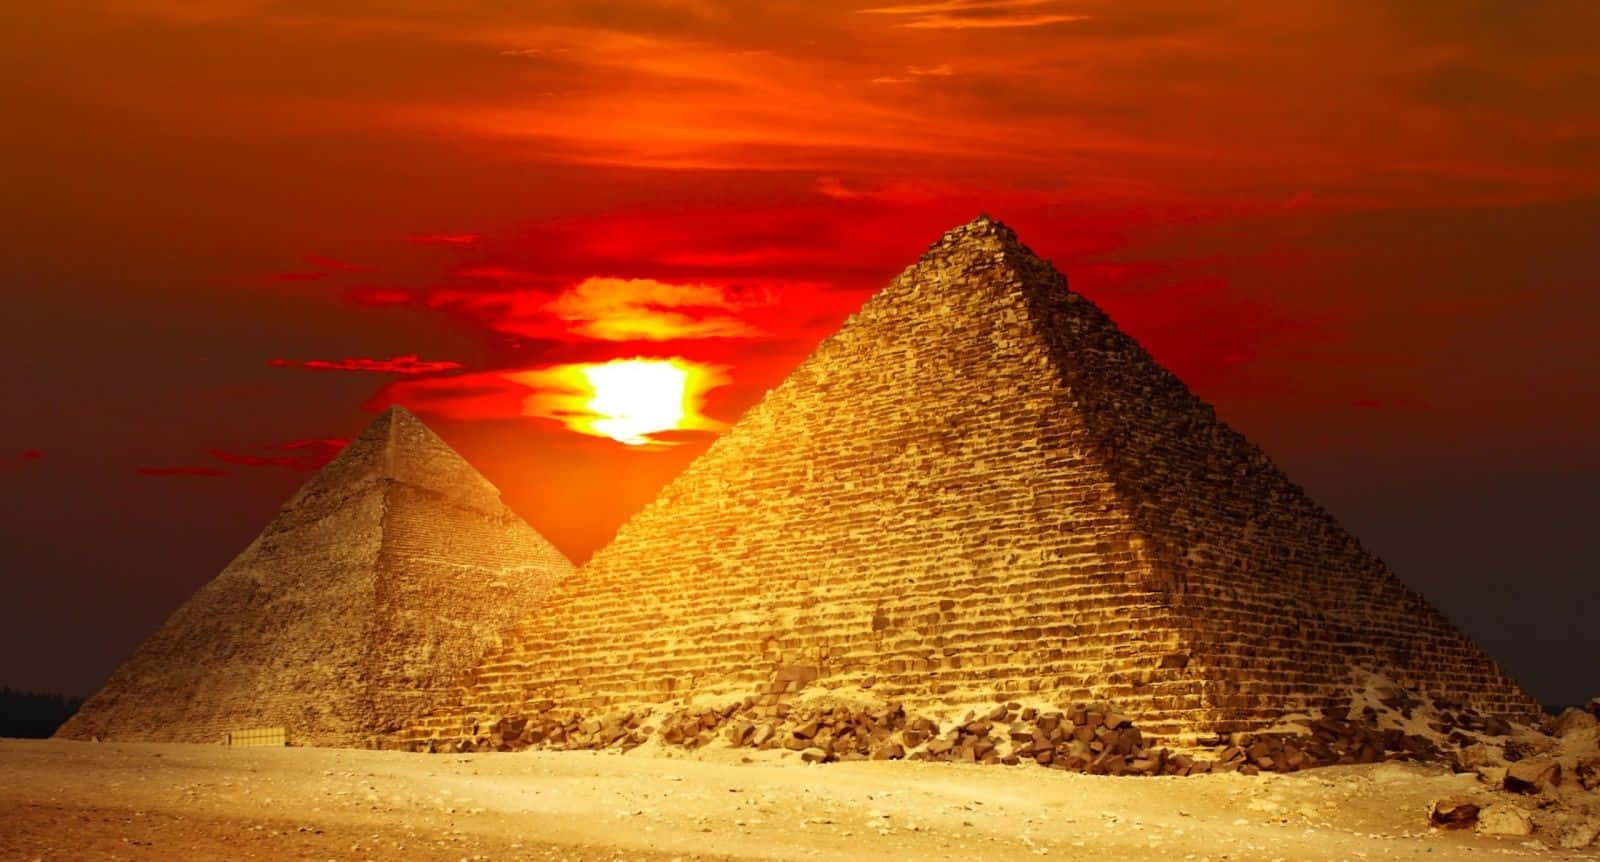 A Stunning View of the Great Pyramids of Giza in Egypt